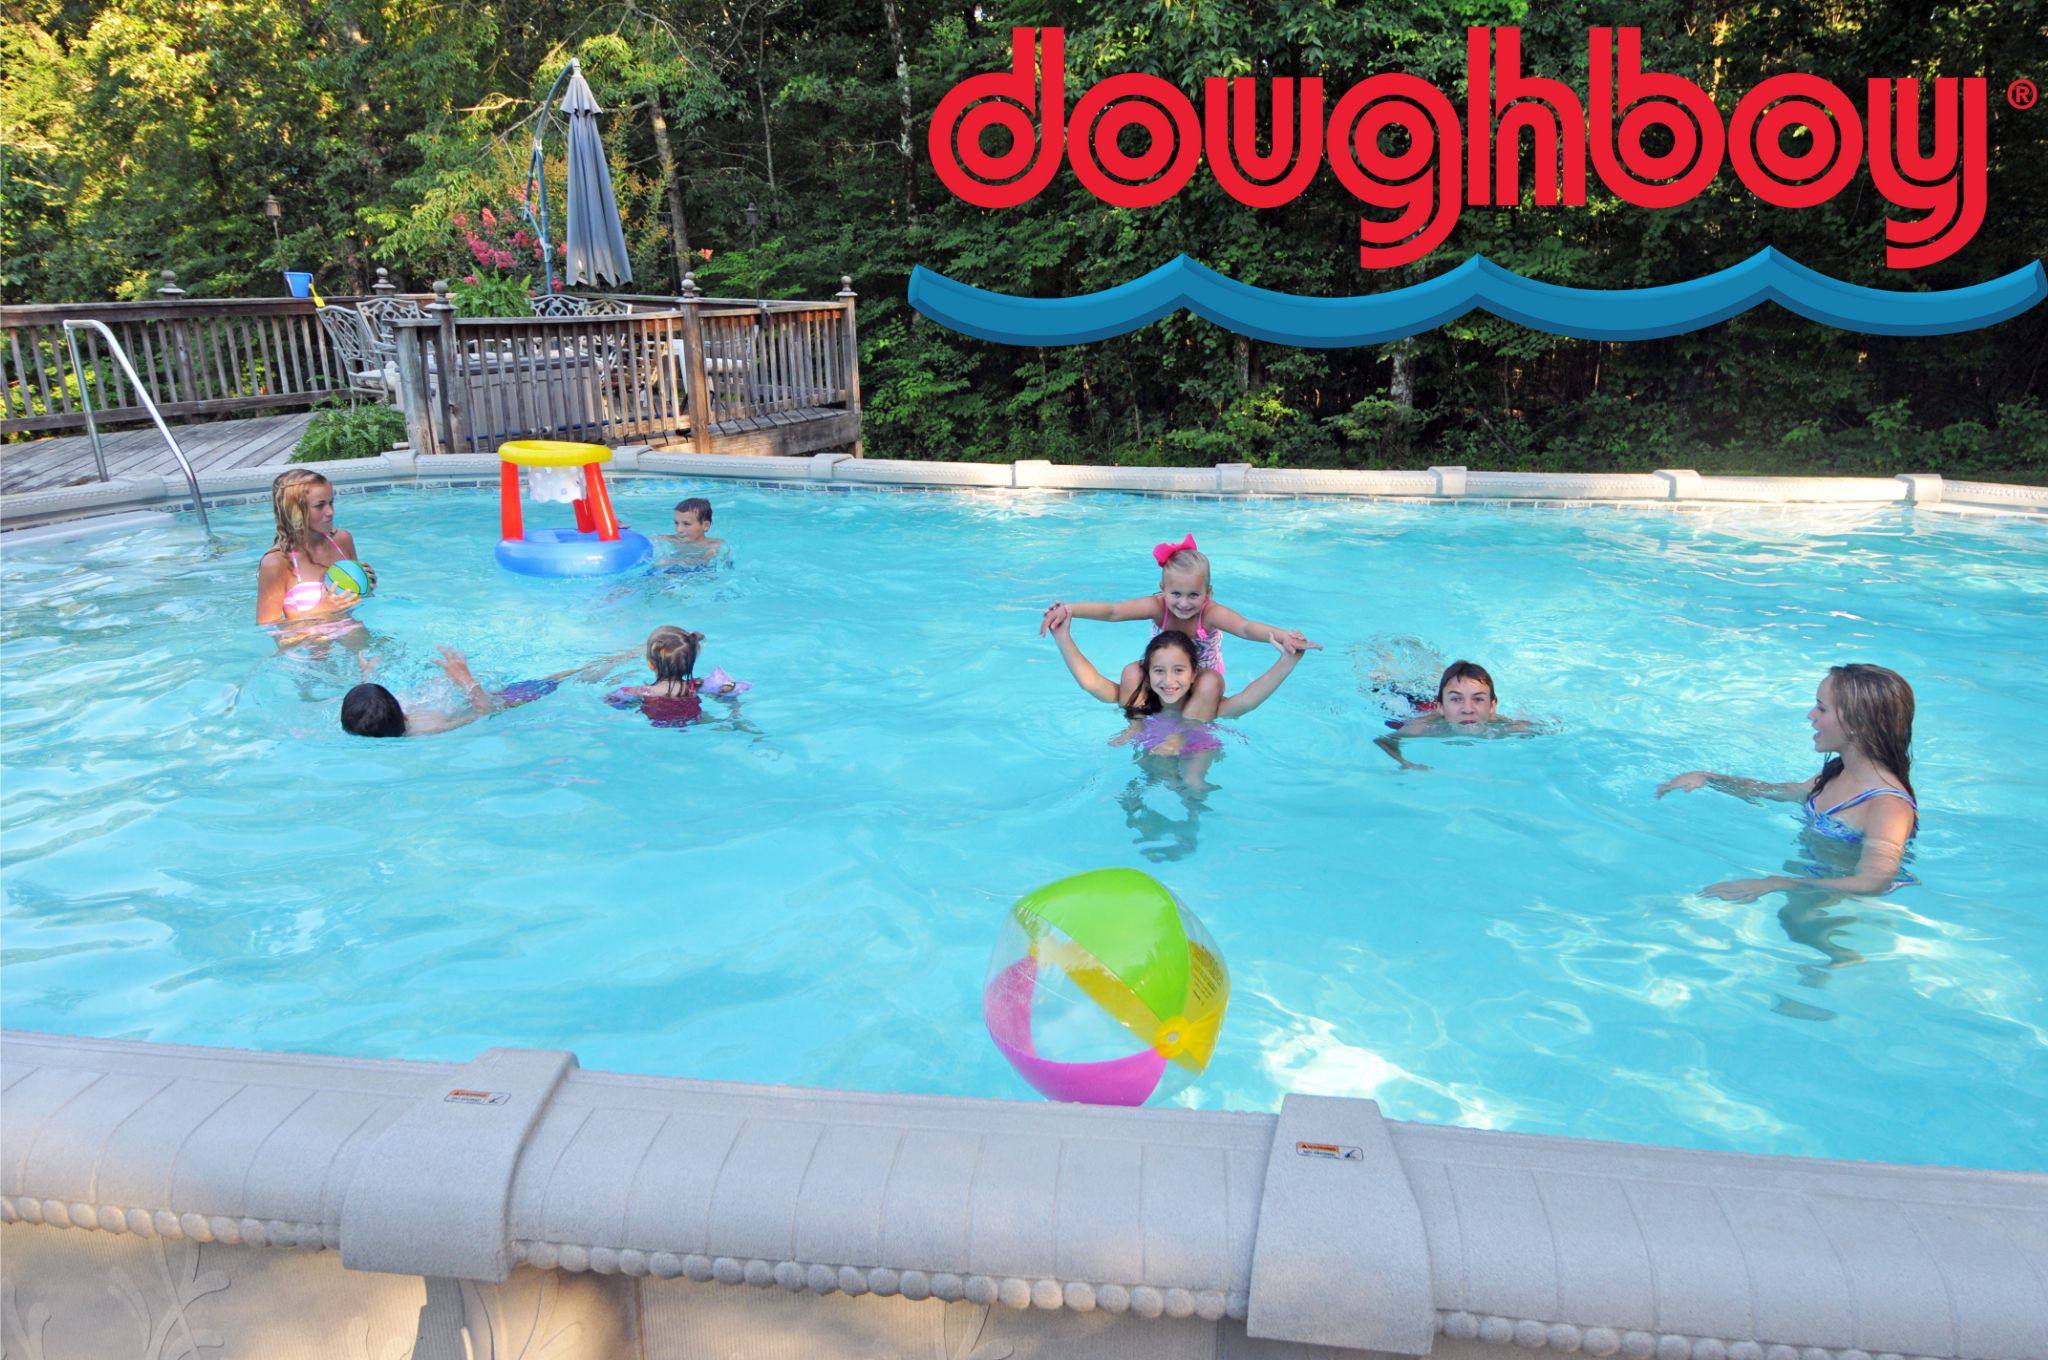 A family playing in a Doughboy above ground pool.